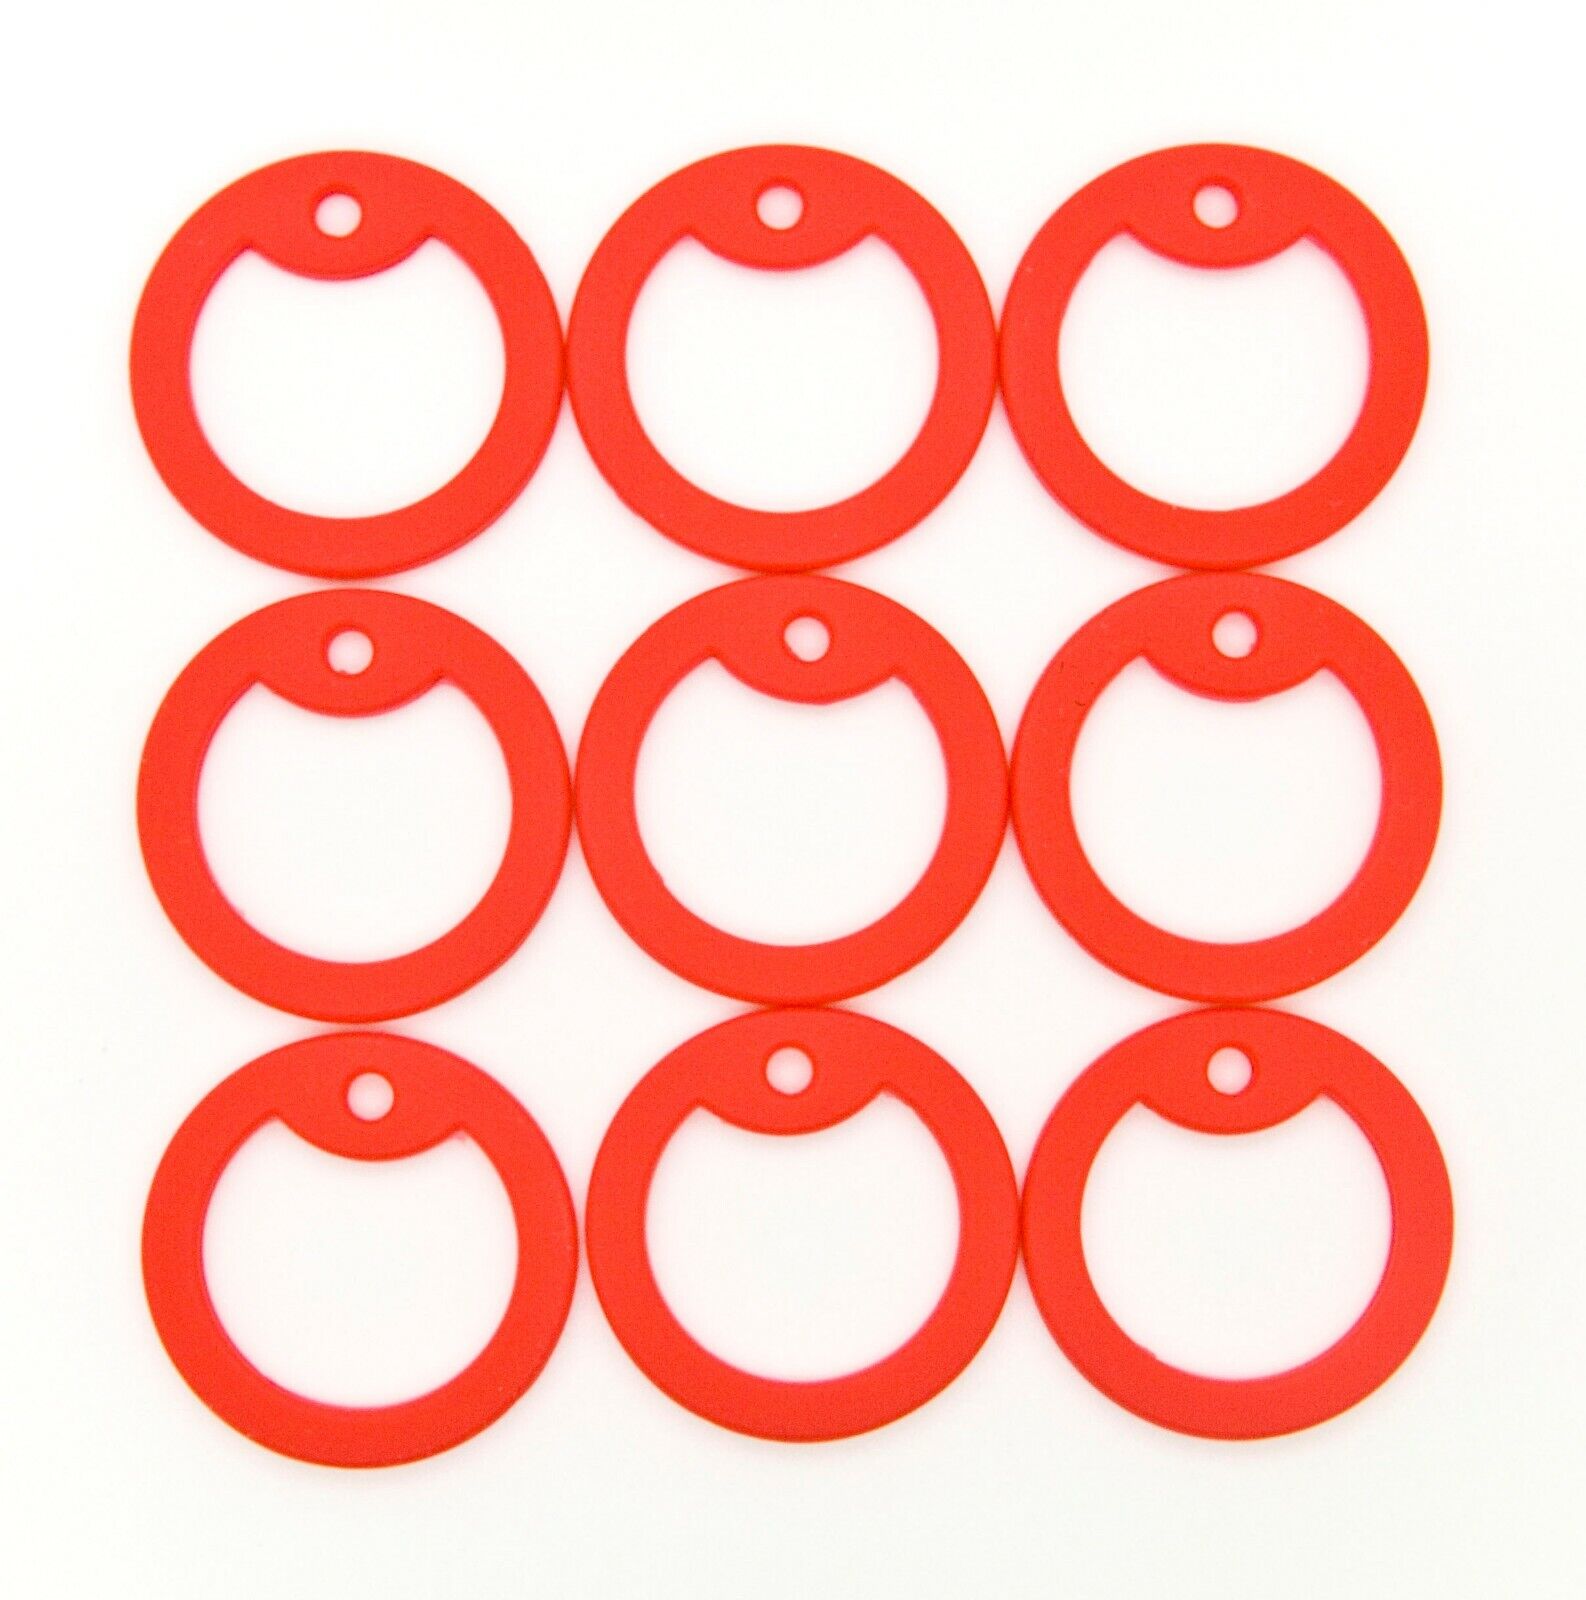 50 pcs Red Military Army ID Dog Tag Silencer Silicone/Rubber Silencers